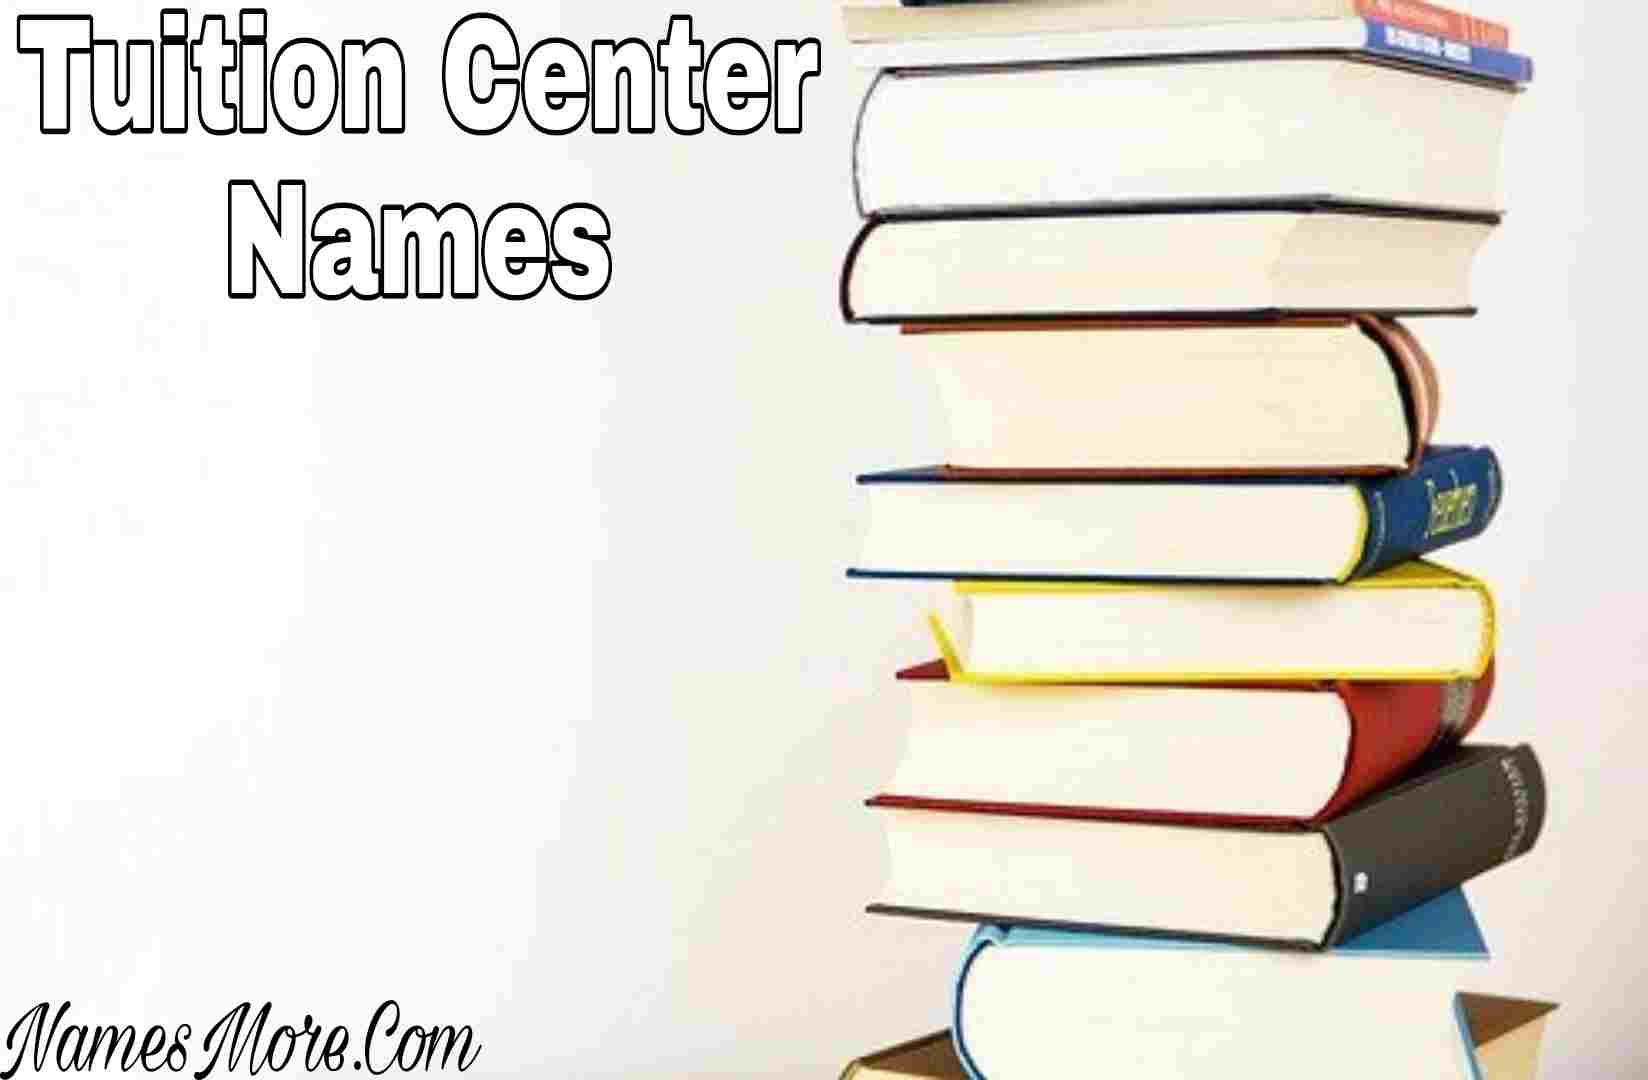 Featured Image for 900+ Tuition Center Names [Cool, Creative & Unique]